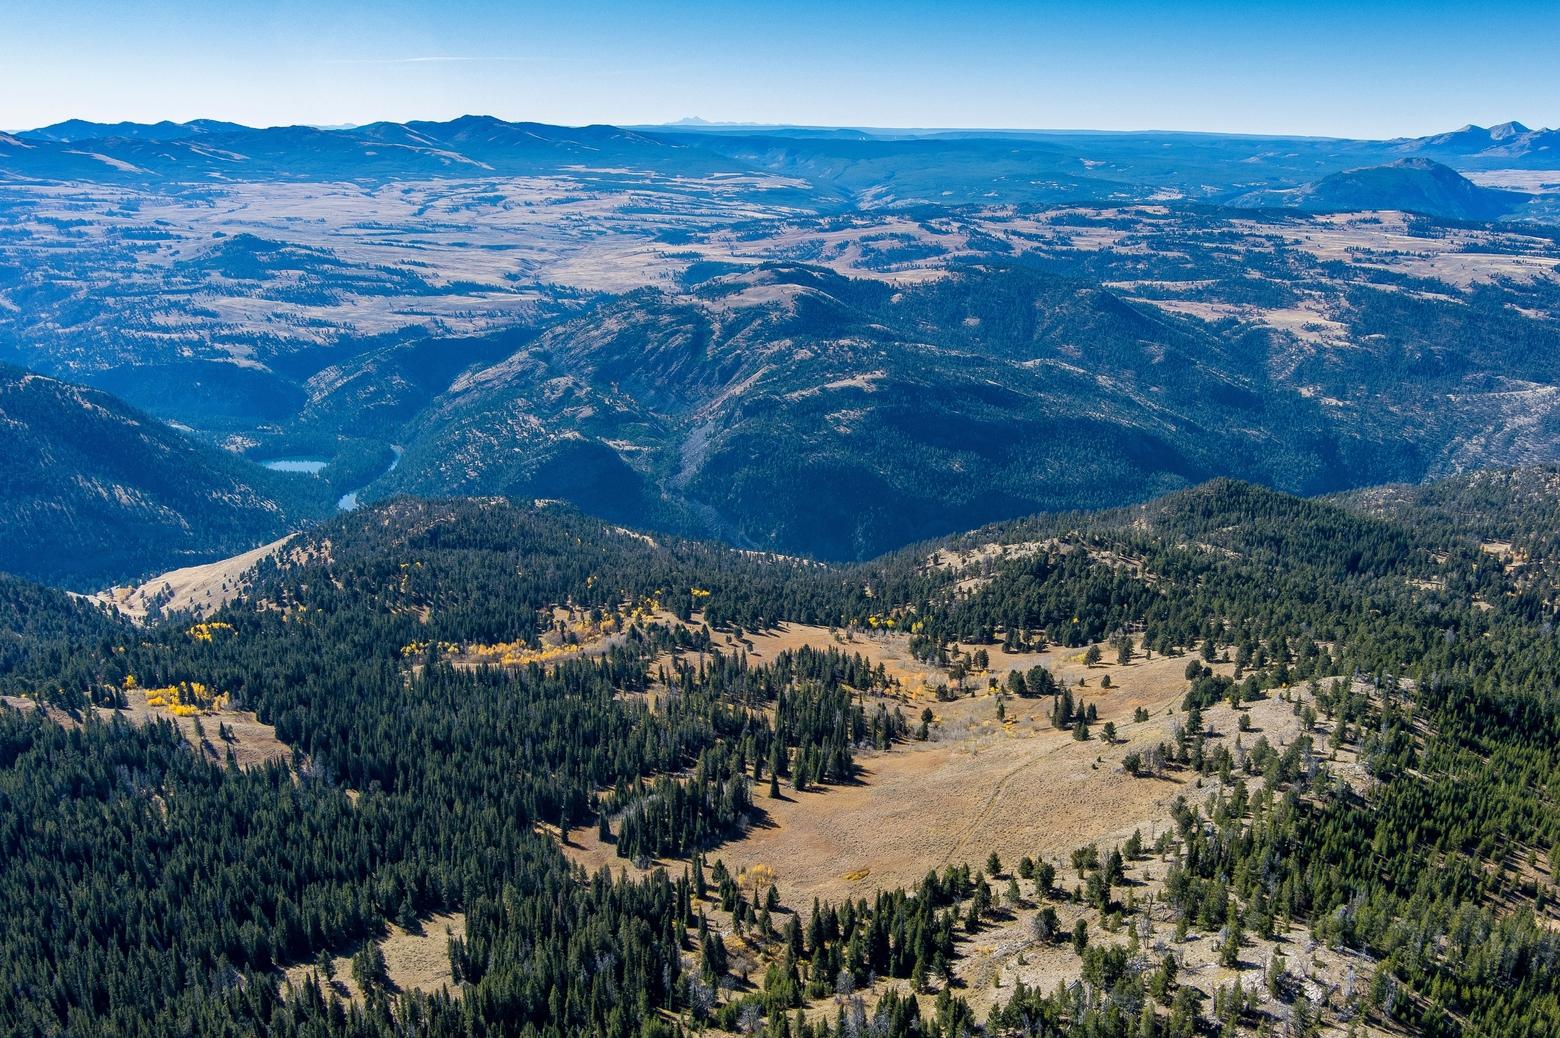 Aerial image of the southern portion of the proposed Crevice mine site (open meadows in the middle of the image). The northern boundary of the Yellowstone National Park runs across the middle of the photograph before the hill drops steeply into the Black Canyon of the Yellowstone River. Photo by William Campbell